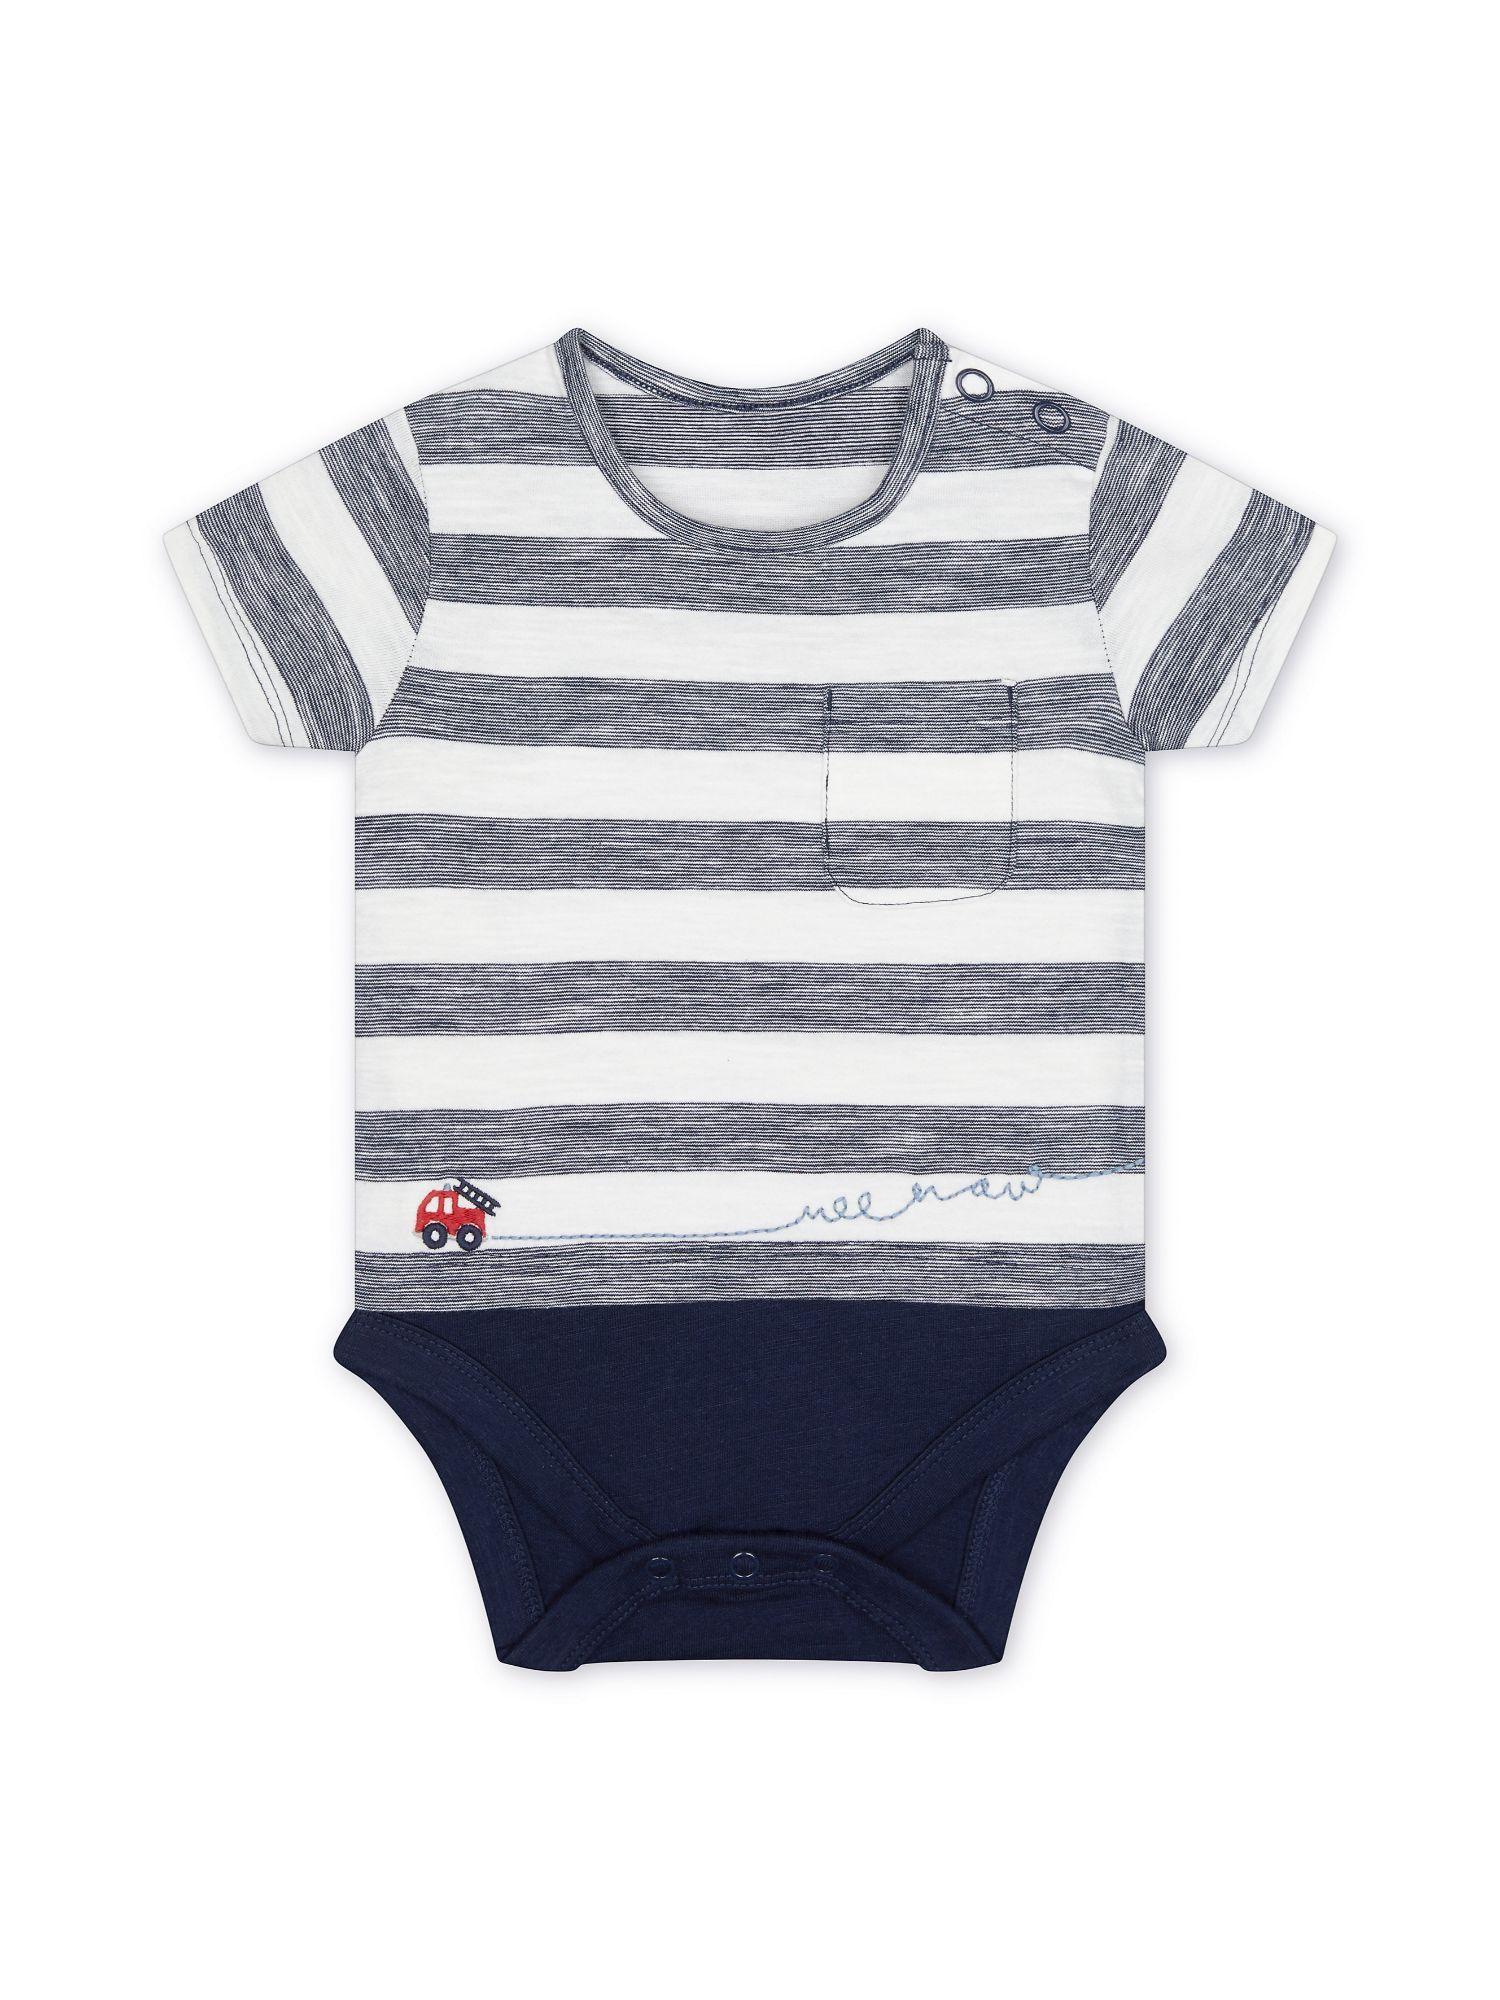 mother care striped, fire engine bodysuit